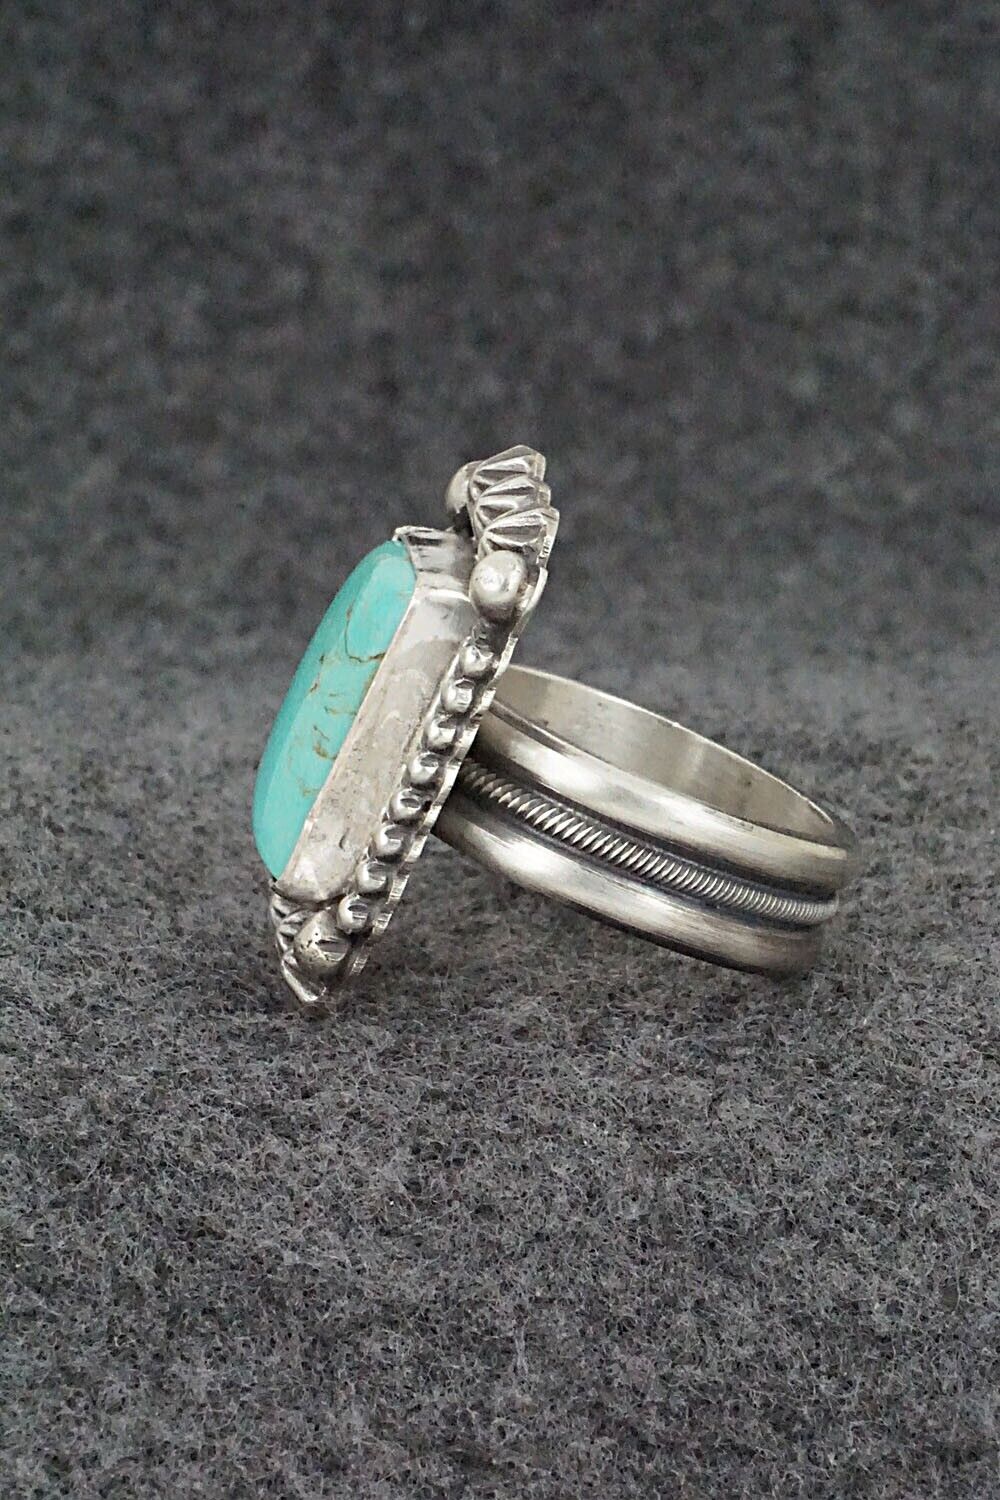 Turquoise & Sterling Silver Ring - Michael Calladitto - Size 9.5